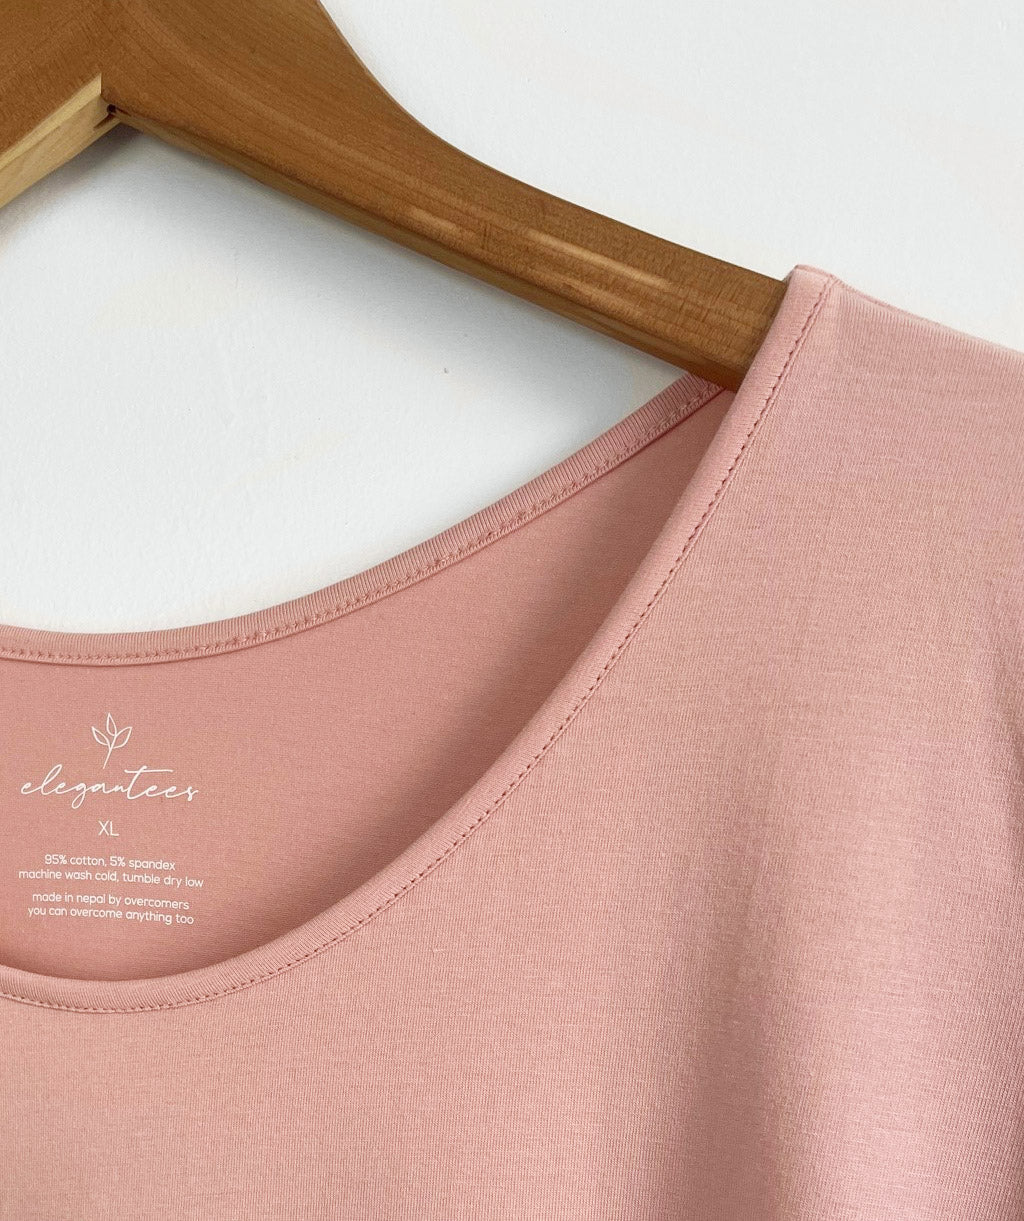 FIONA ruched tee in New Peach